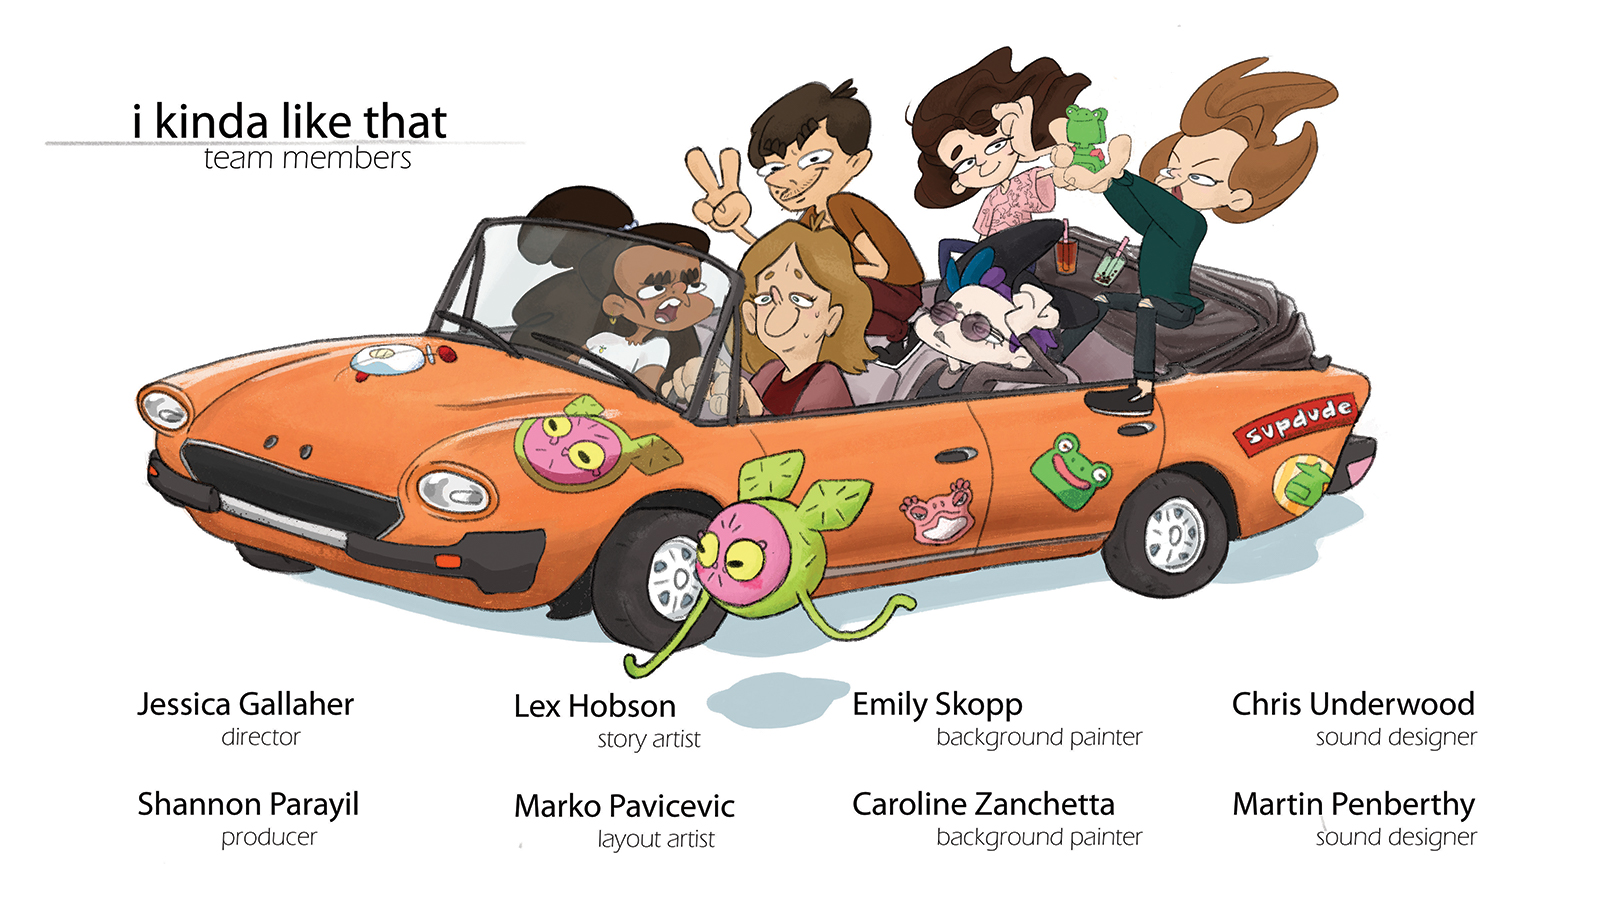 Drawn caricatures of Flap's creators in a car.